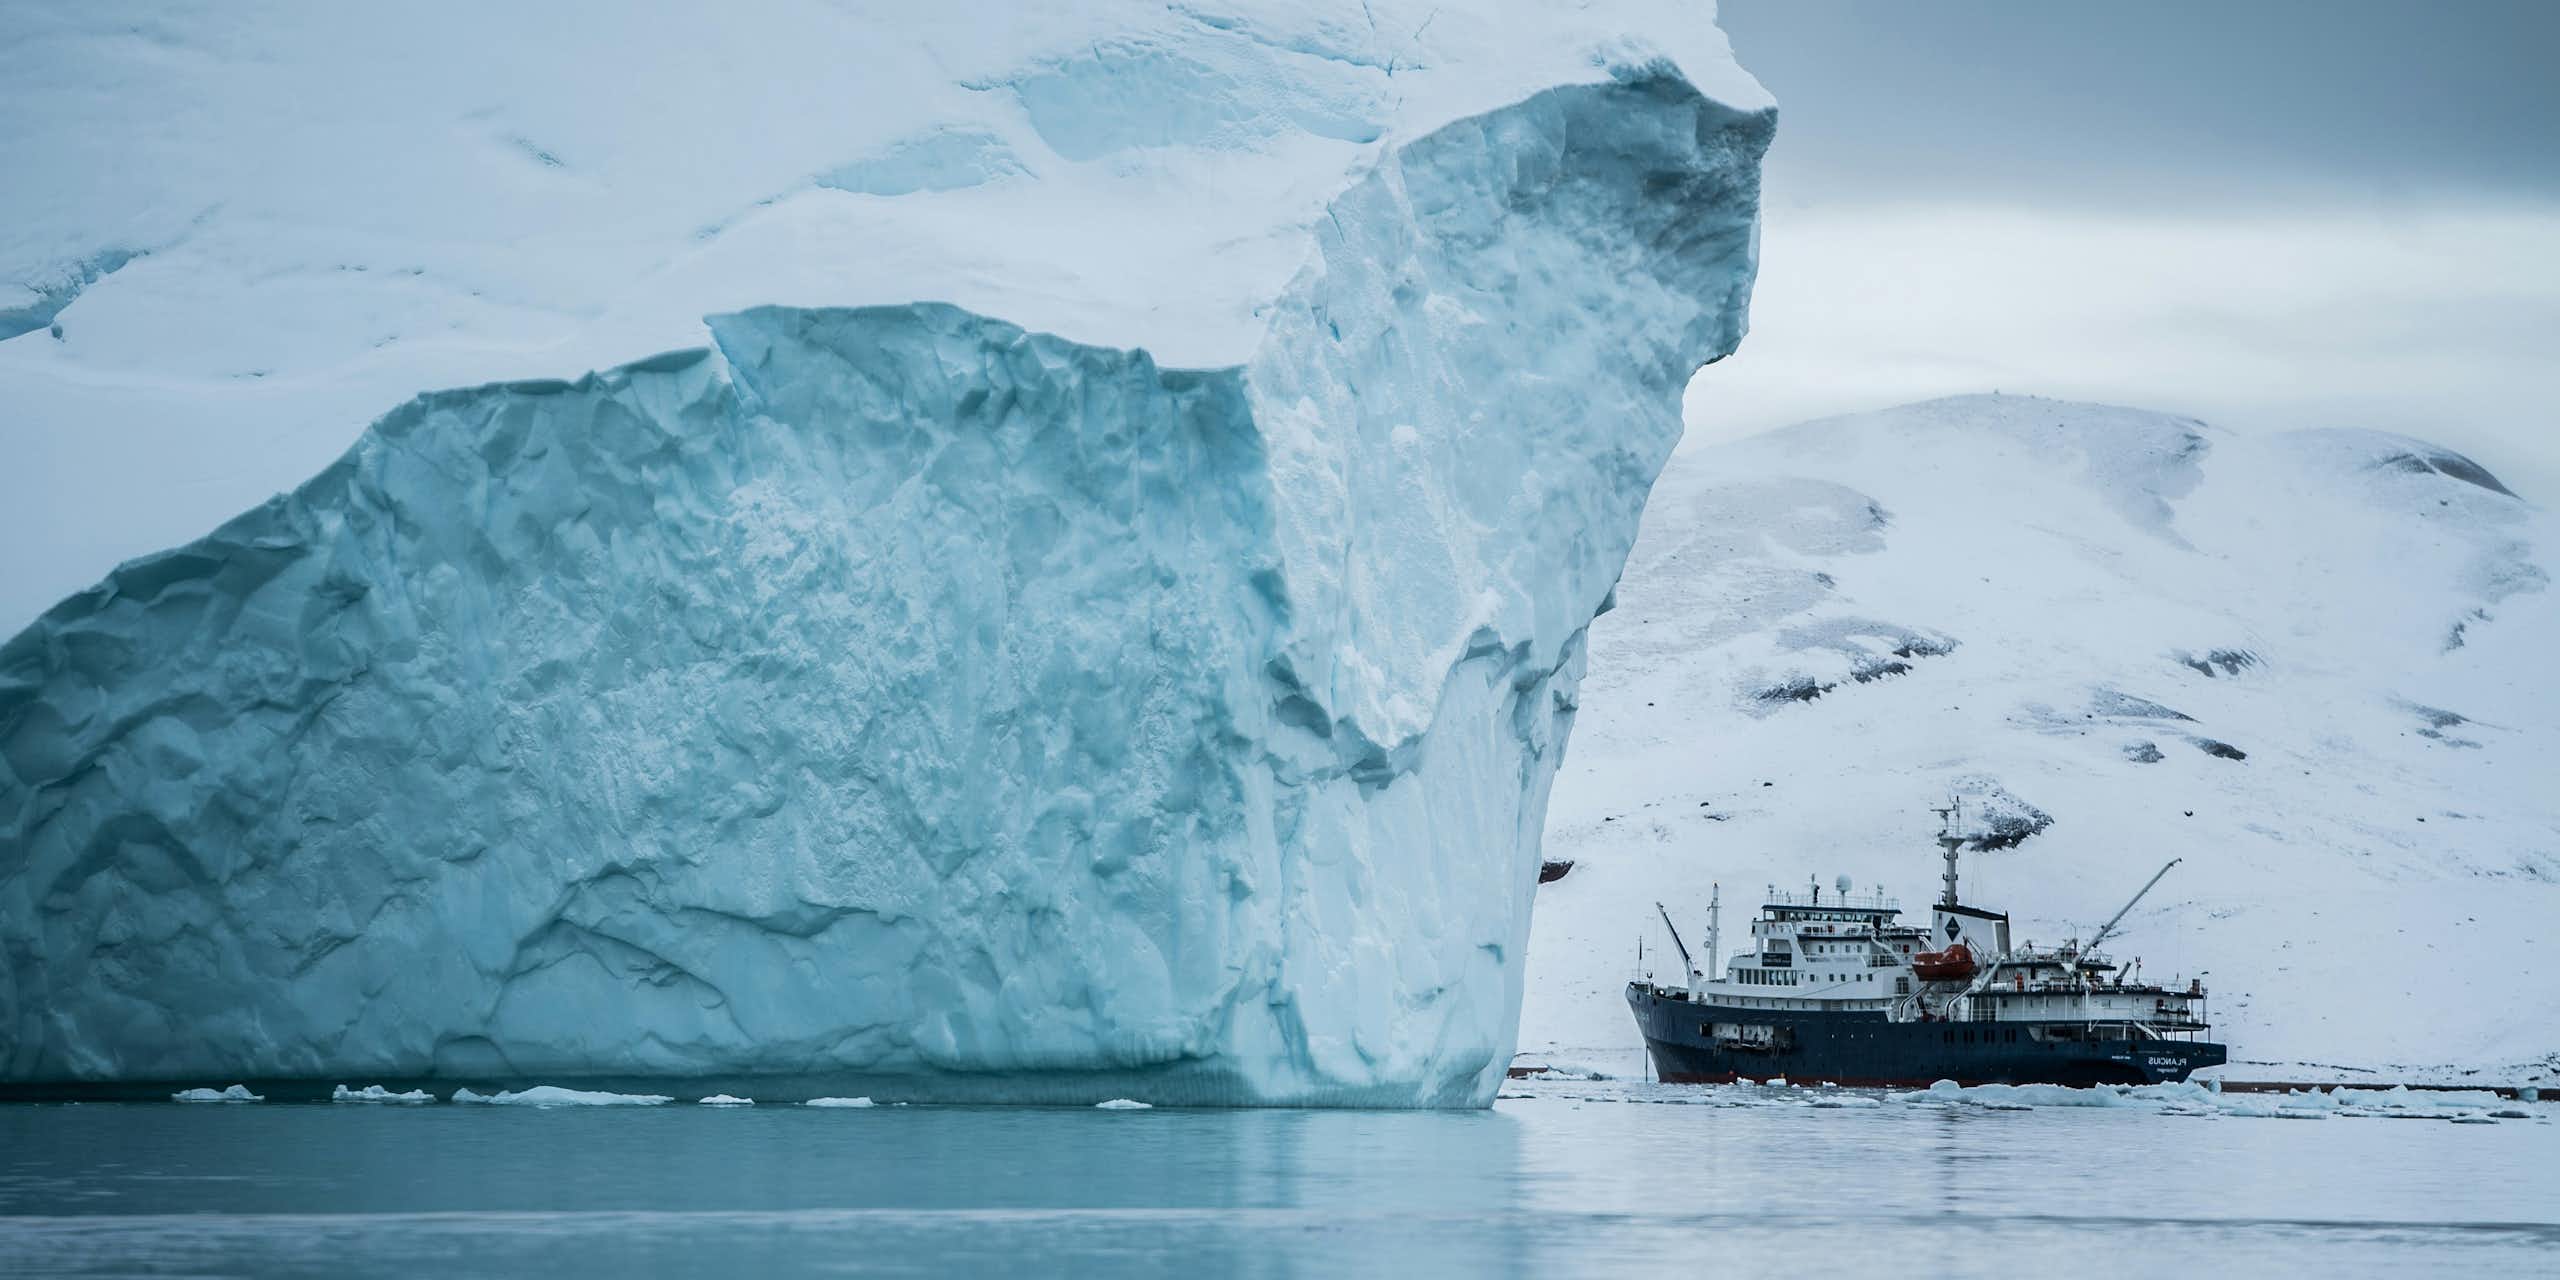 An iceberg dwarfs a fishing trawler, with Greenland in the background..